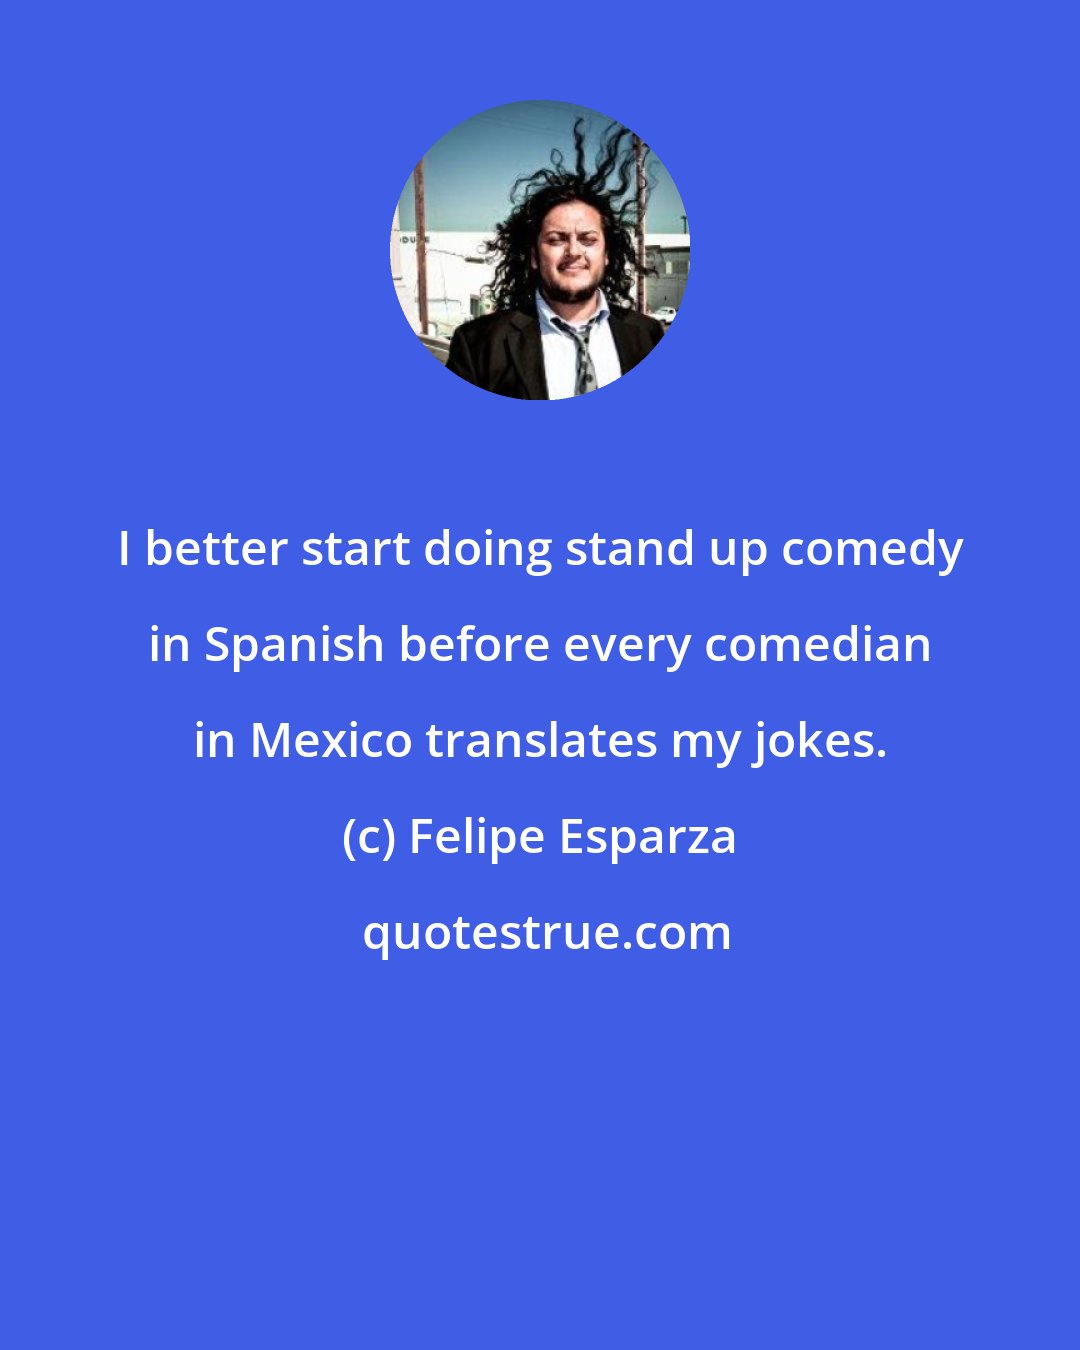 Felipe Esparza: I better start doing stand up comedy in Spanish before every comedian in Mexico translates my jokes.